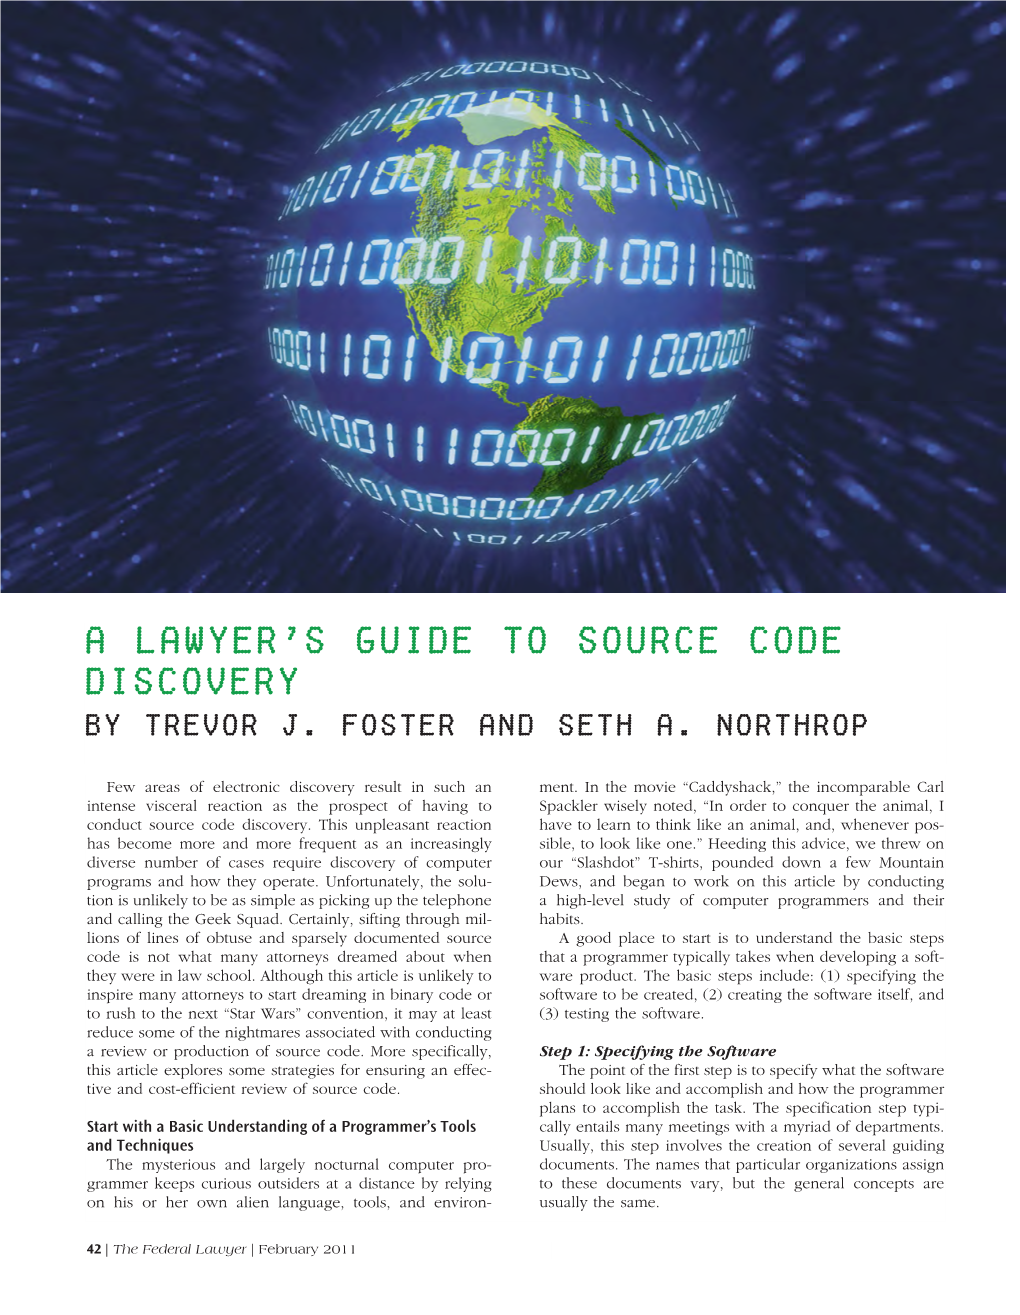 A Lawyer's Guide to Source Code Discovery by Trevor J